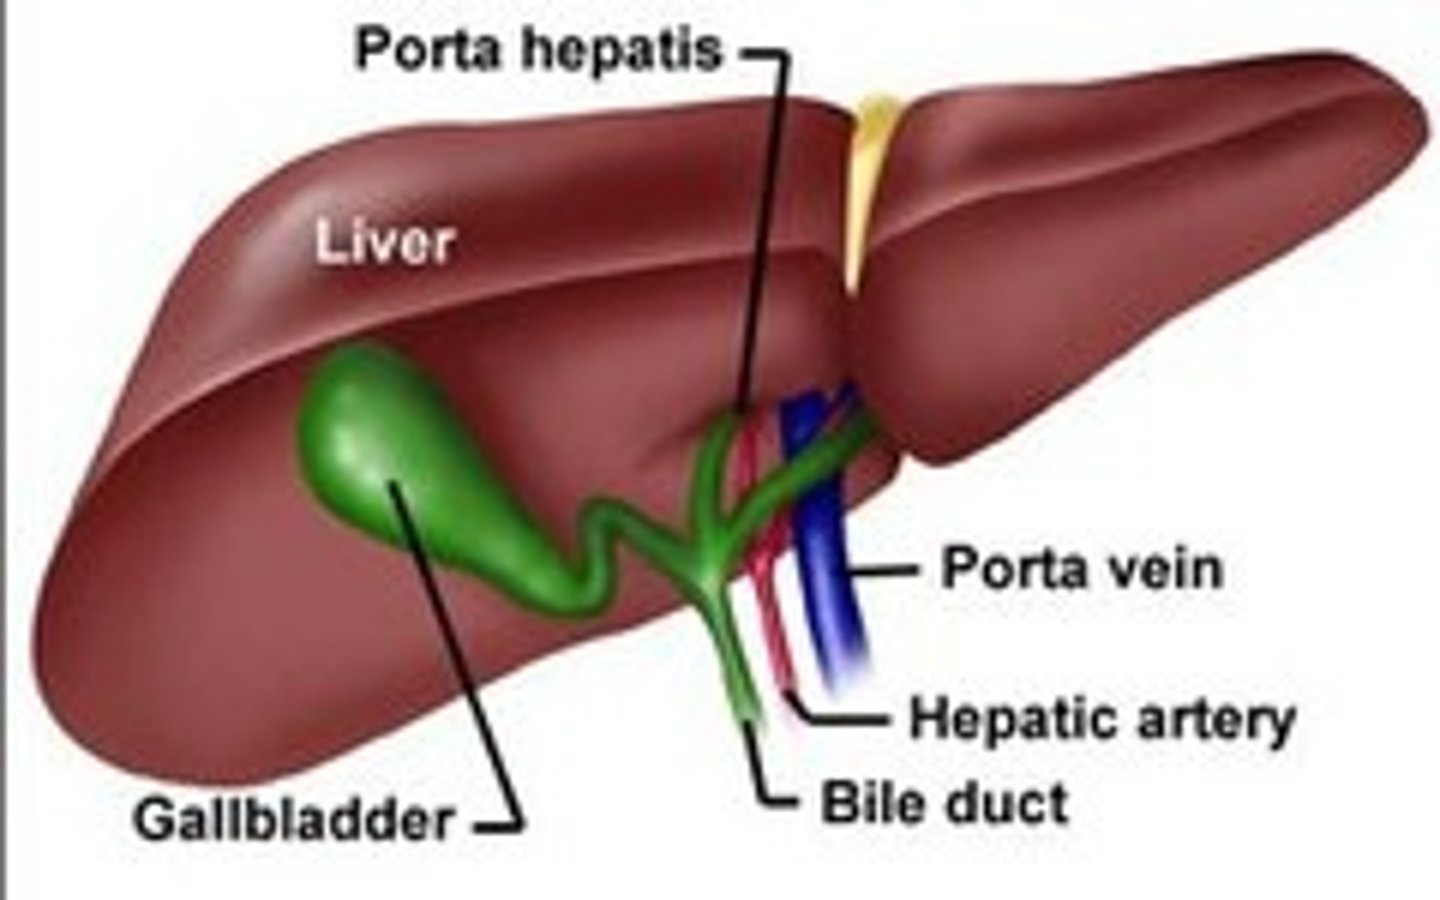 <p>The ______________ is an area at the liver named after its triangular shape and its three major components: the hepatic artery, the hepatic portal vein, and the hepatic ducts, or bile ducts.<br><br>The ______________- serves as a blood-vessel gateway or entrance of the liver's hepatic lobule.</p>